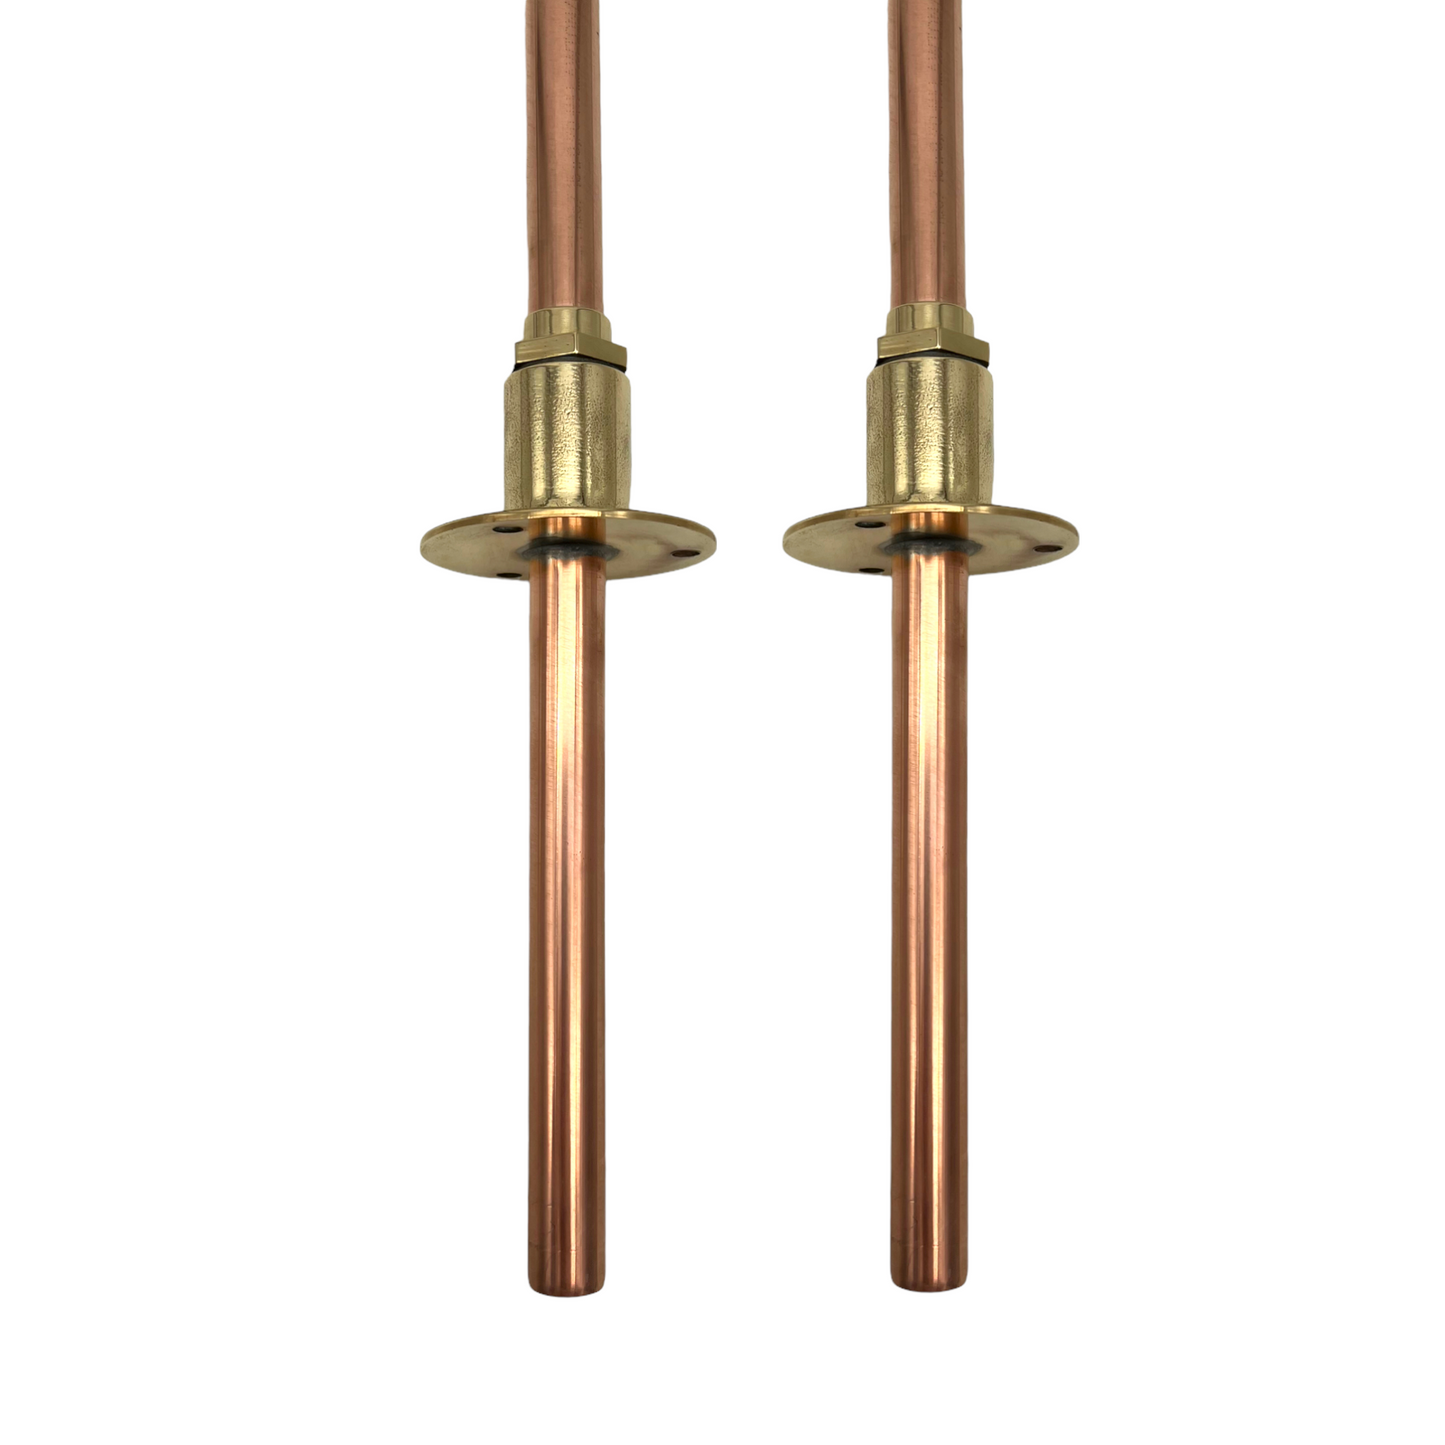 15mm tail ends of Copper and brass handmade vintage style taps sold by All Things French Store